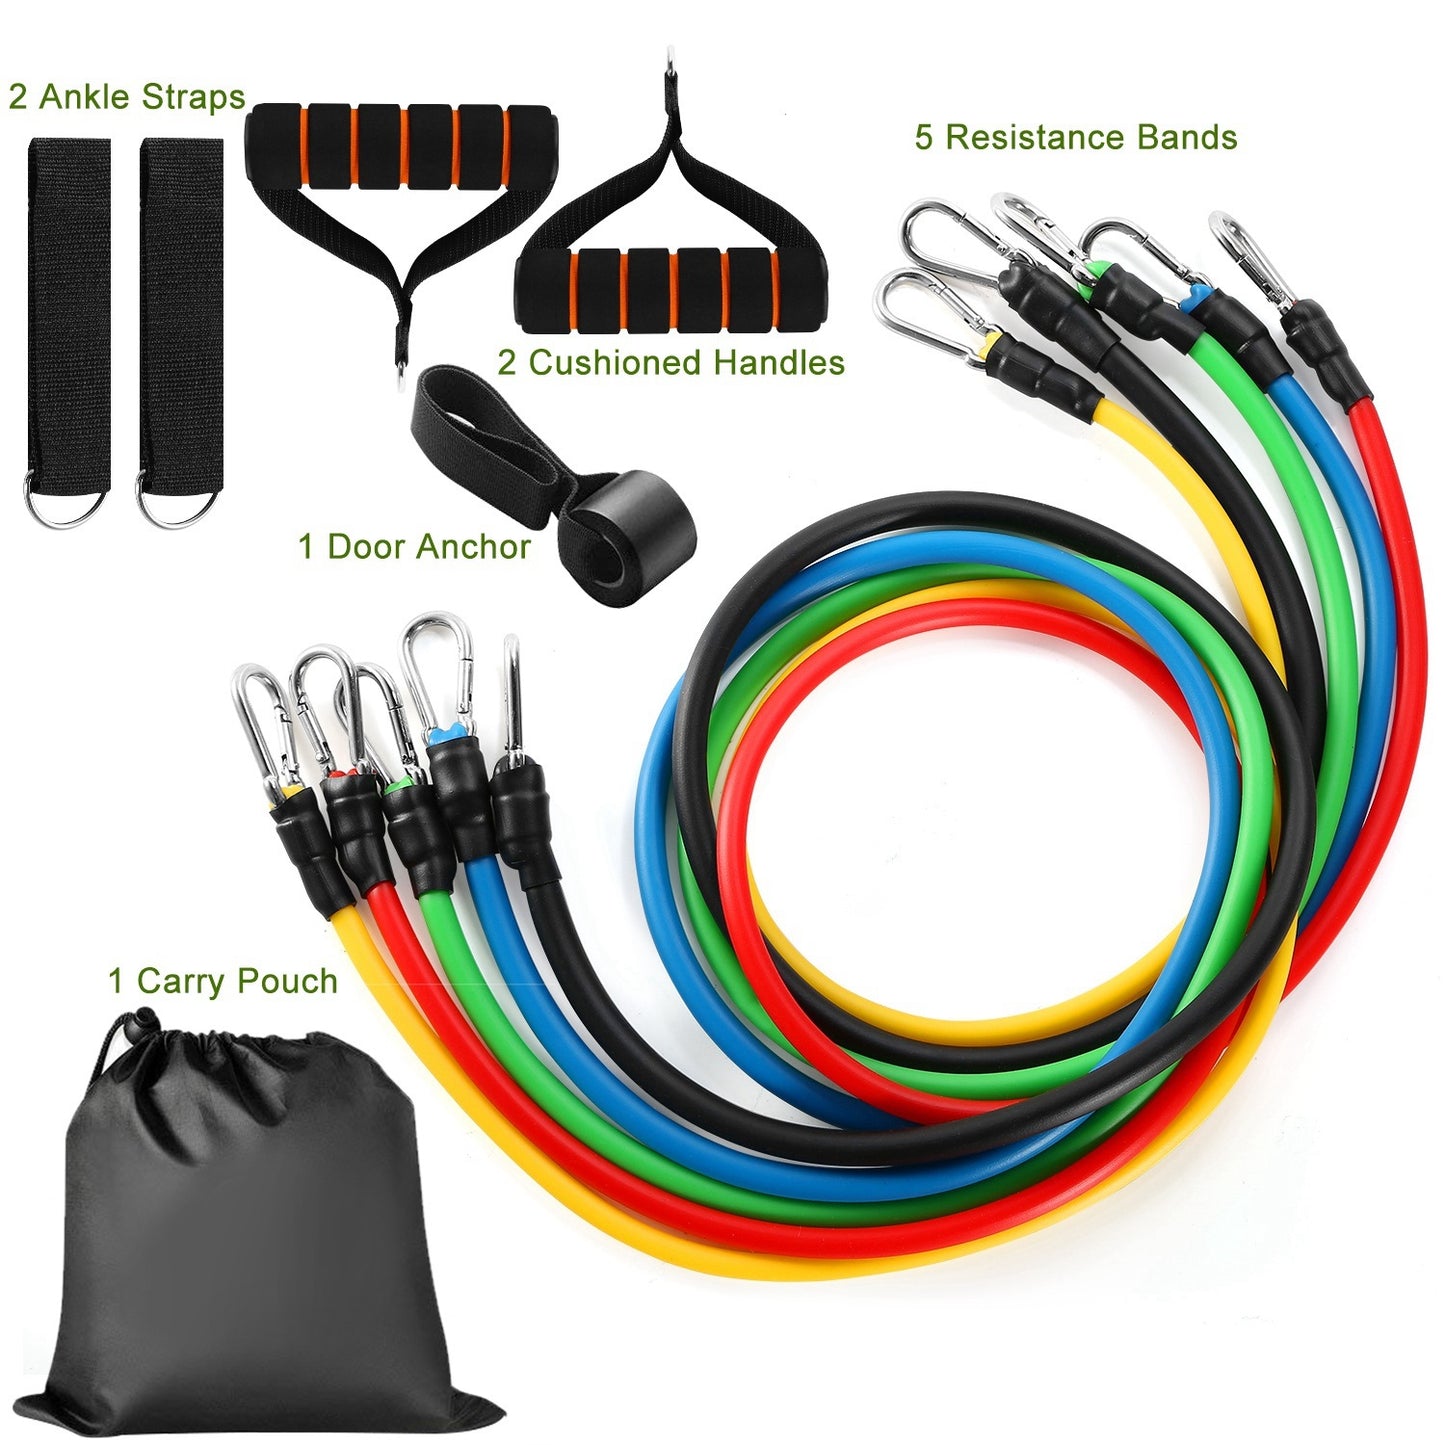 11Pcs Resistance Bands Set Fitness Workout Tubes Exercise Tube Bands Up to 100lbs